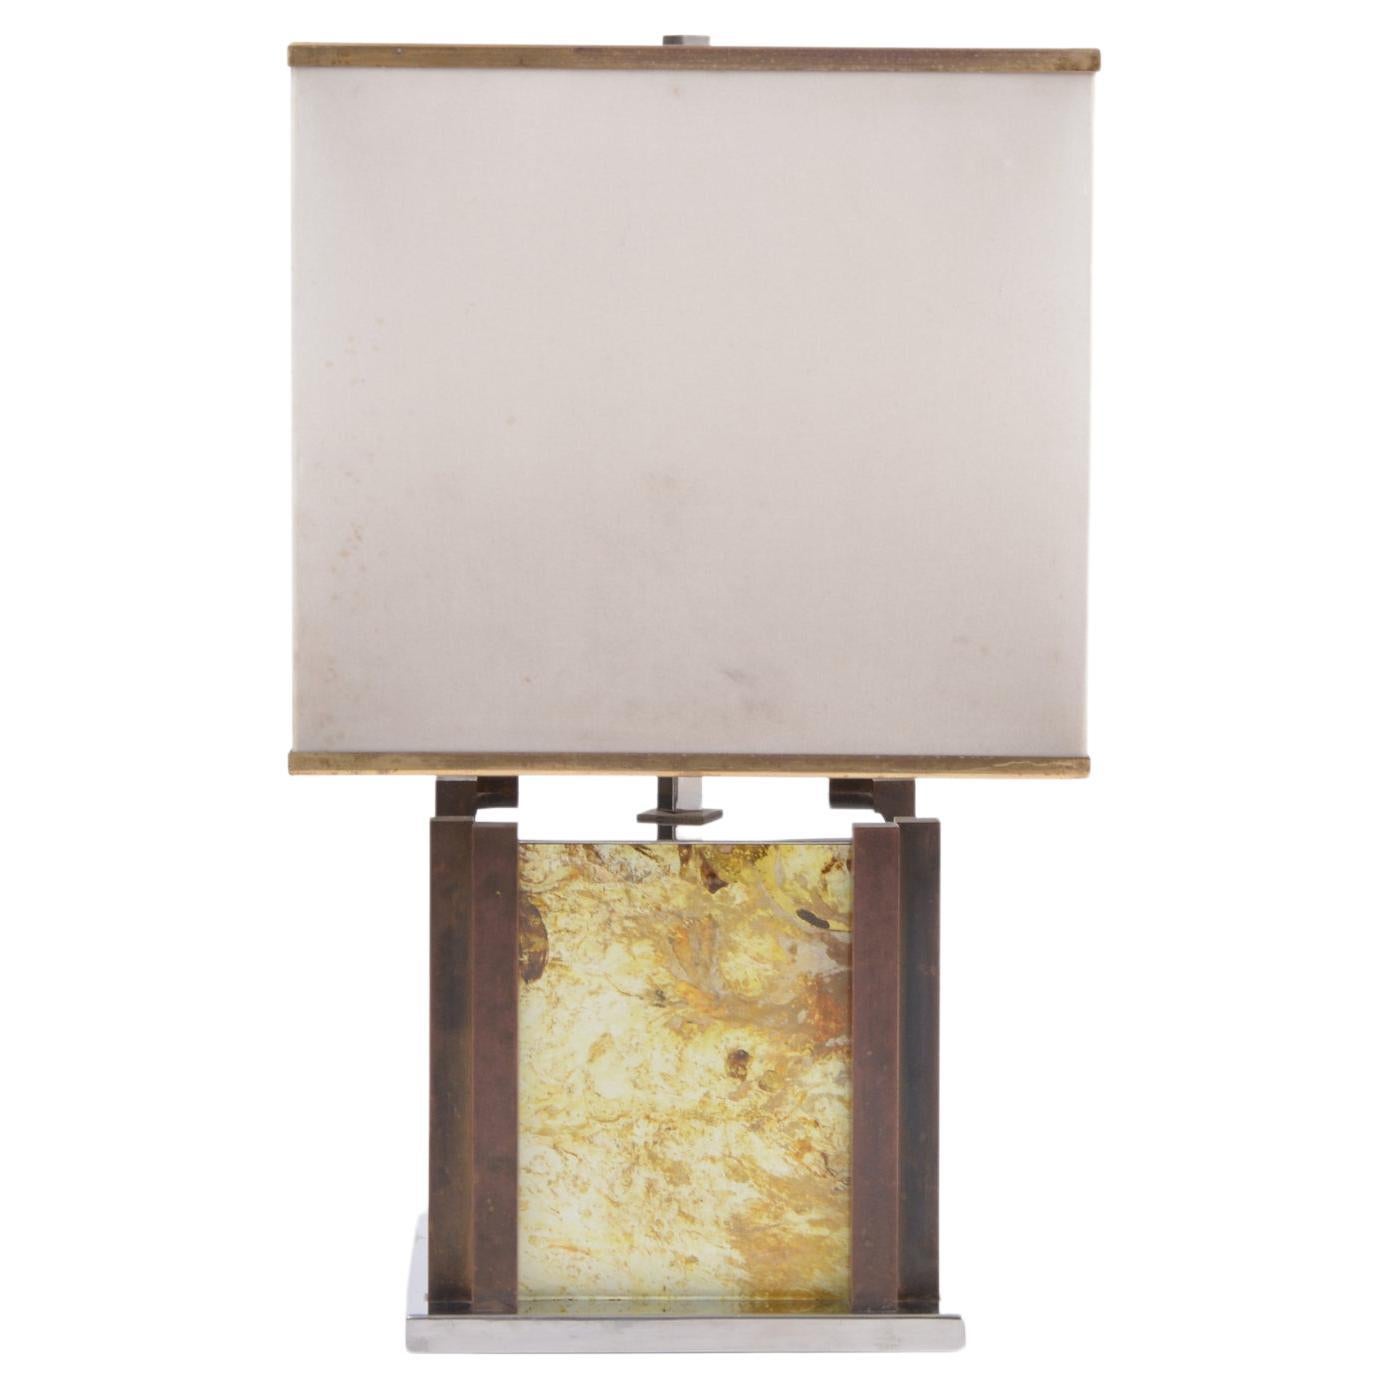 Large Romeo Rega Hollywood Regency Style Table Lamp in Brass and Chrome